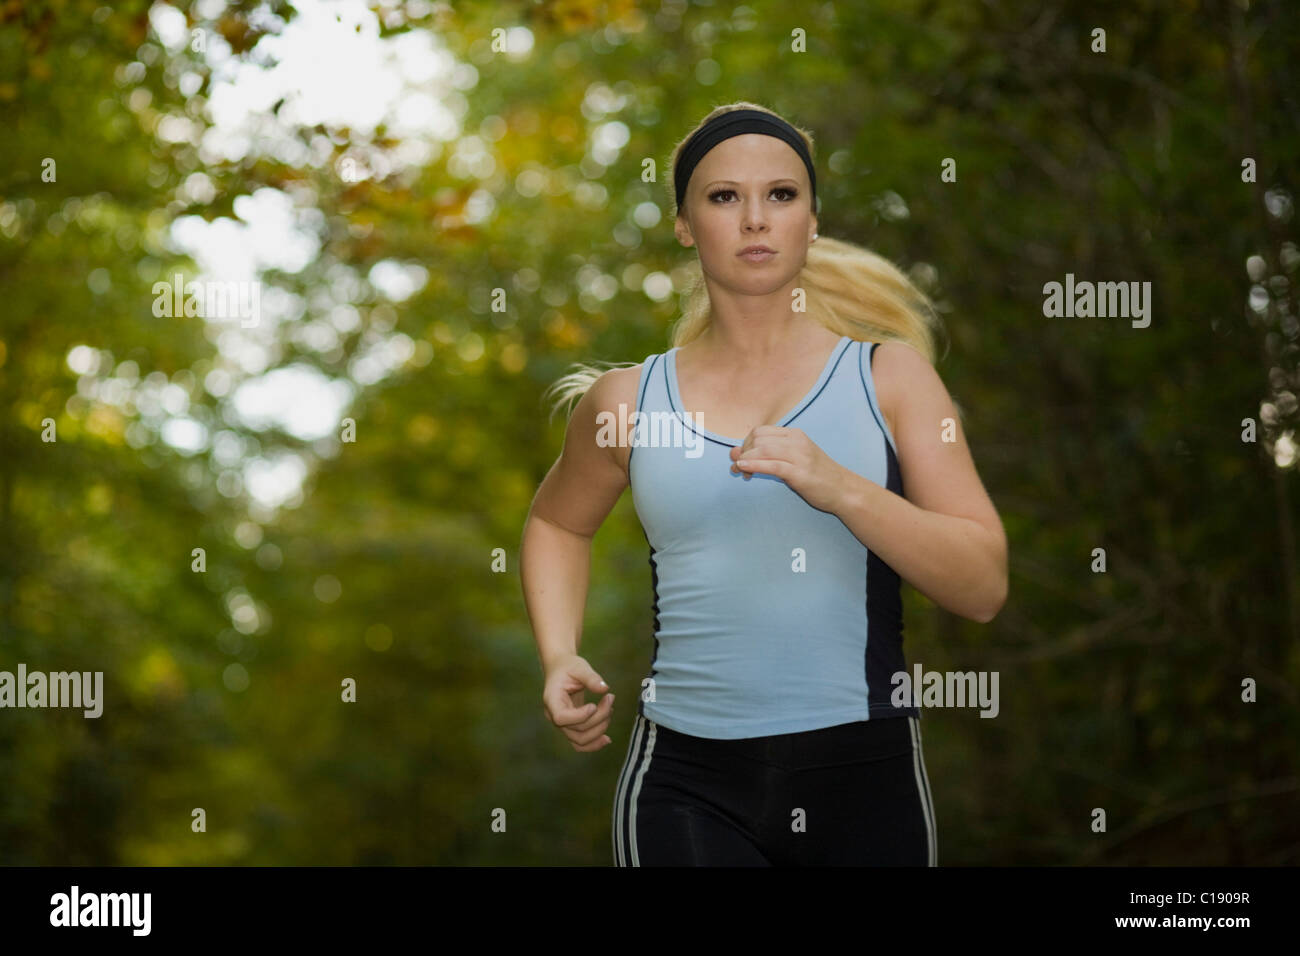 Young woman jogging in an autumnal forest Stock Photo